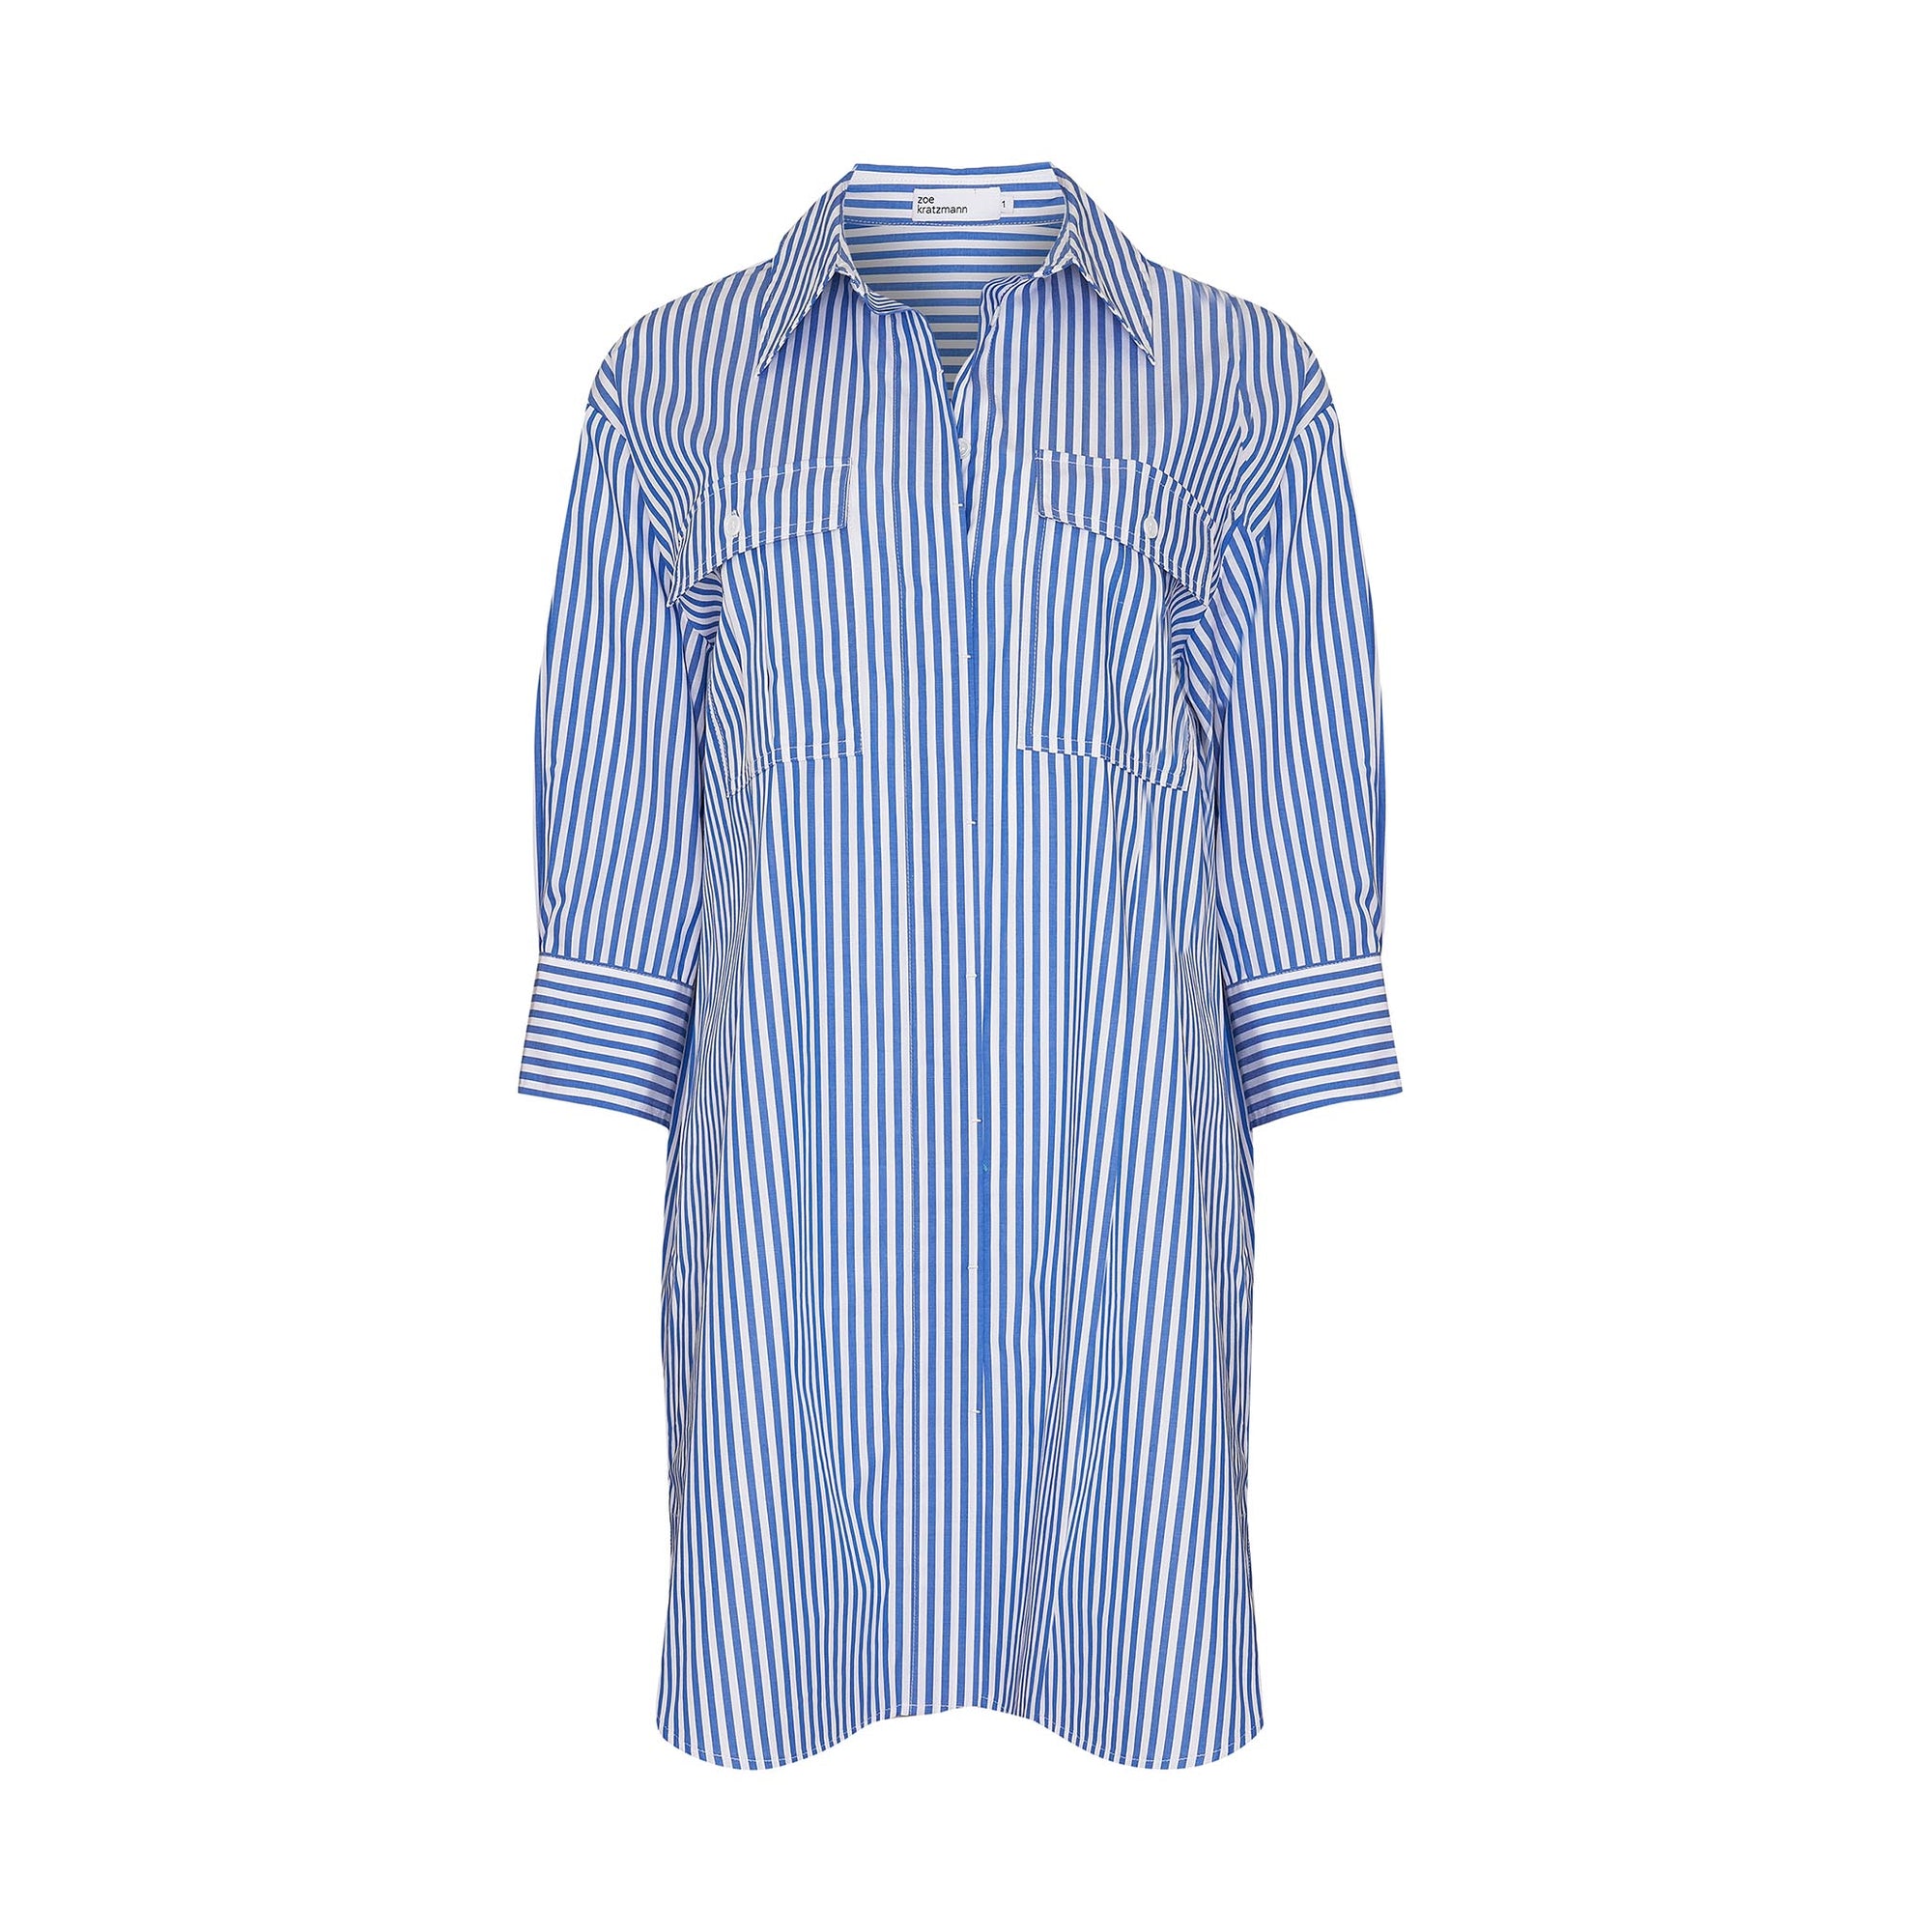 blue and white stripe, mid length sleeve, oversized patch pockets, high-low hemline, buttons down centre, crisp collar, dress, product image